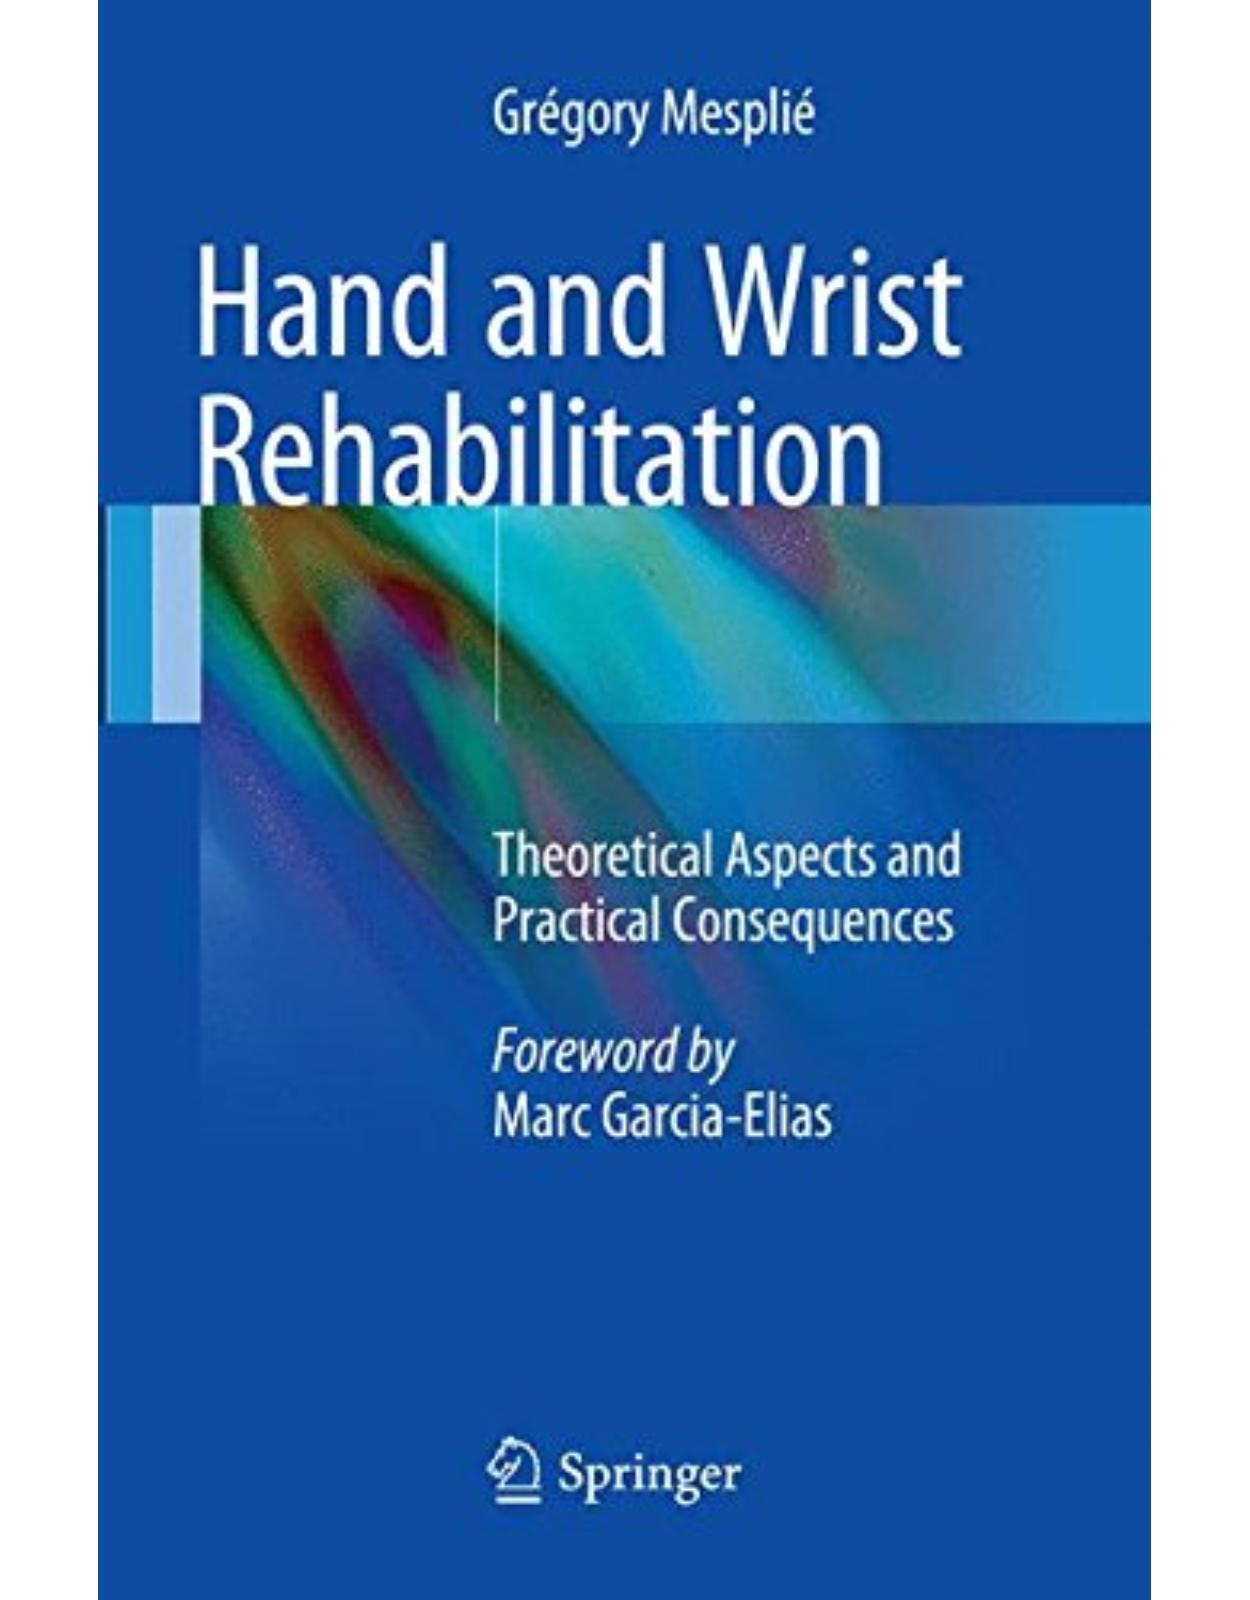 Hand and Wrist Rehabilitation. Theoretical Aspects and Practical Consequences